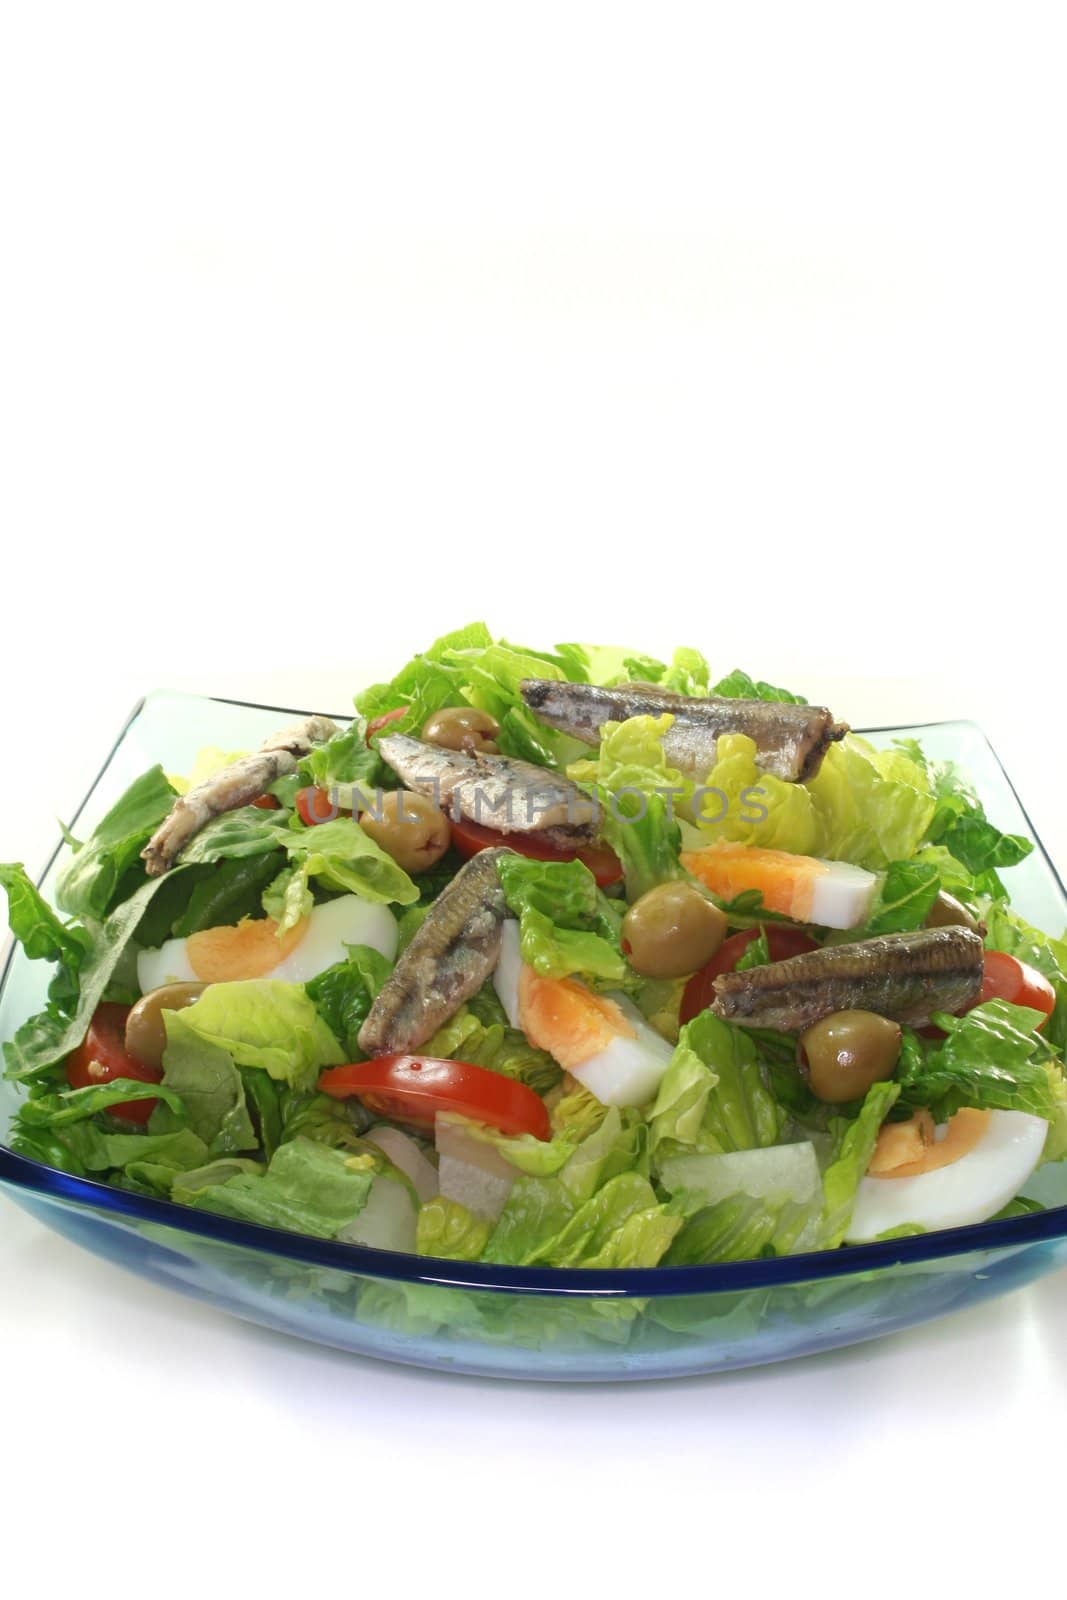 Chef salad with anchovies, egg, tomatoes, olives and salad leaves